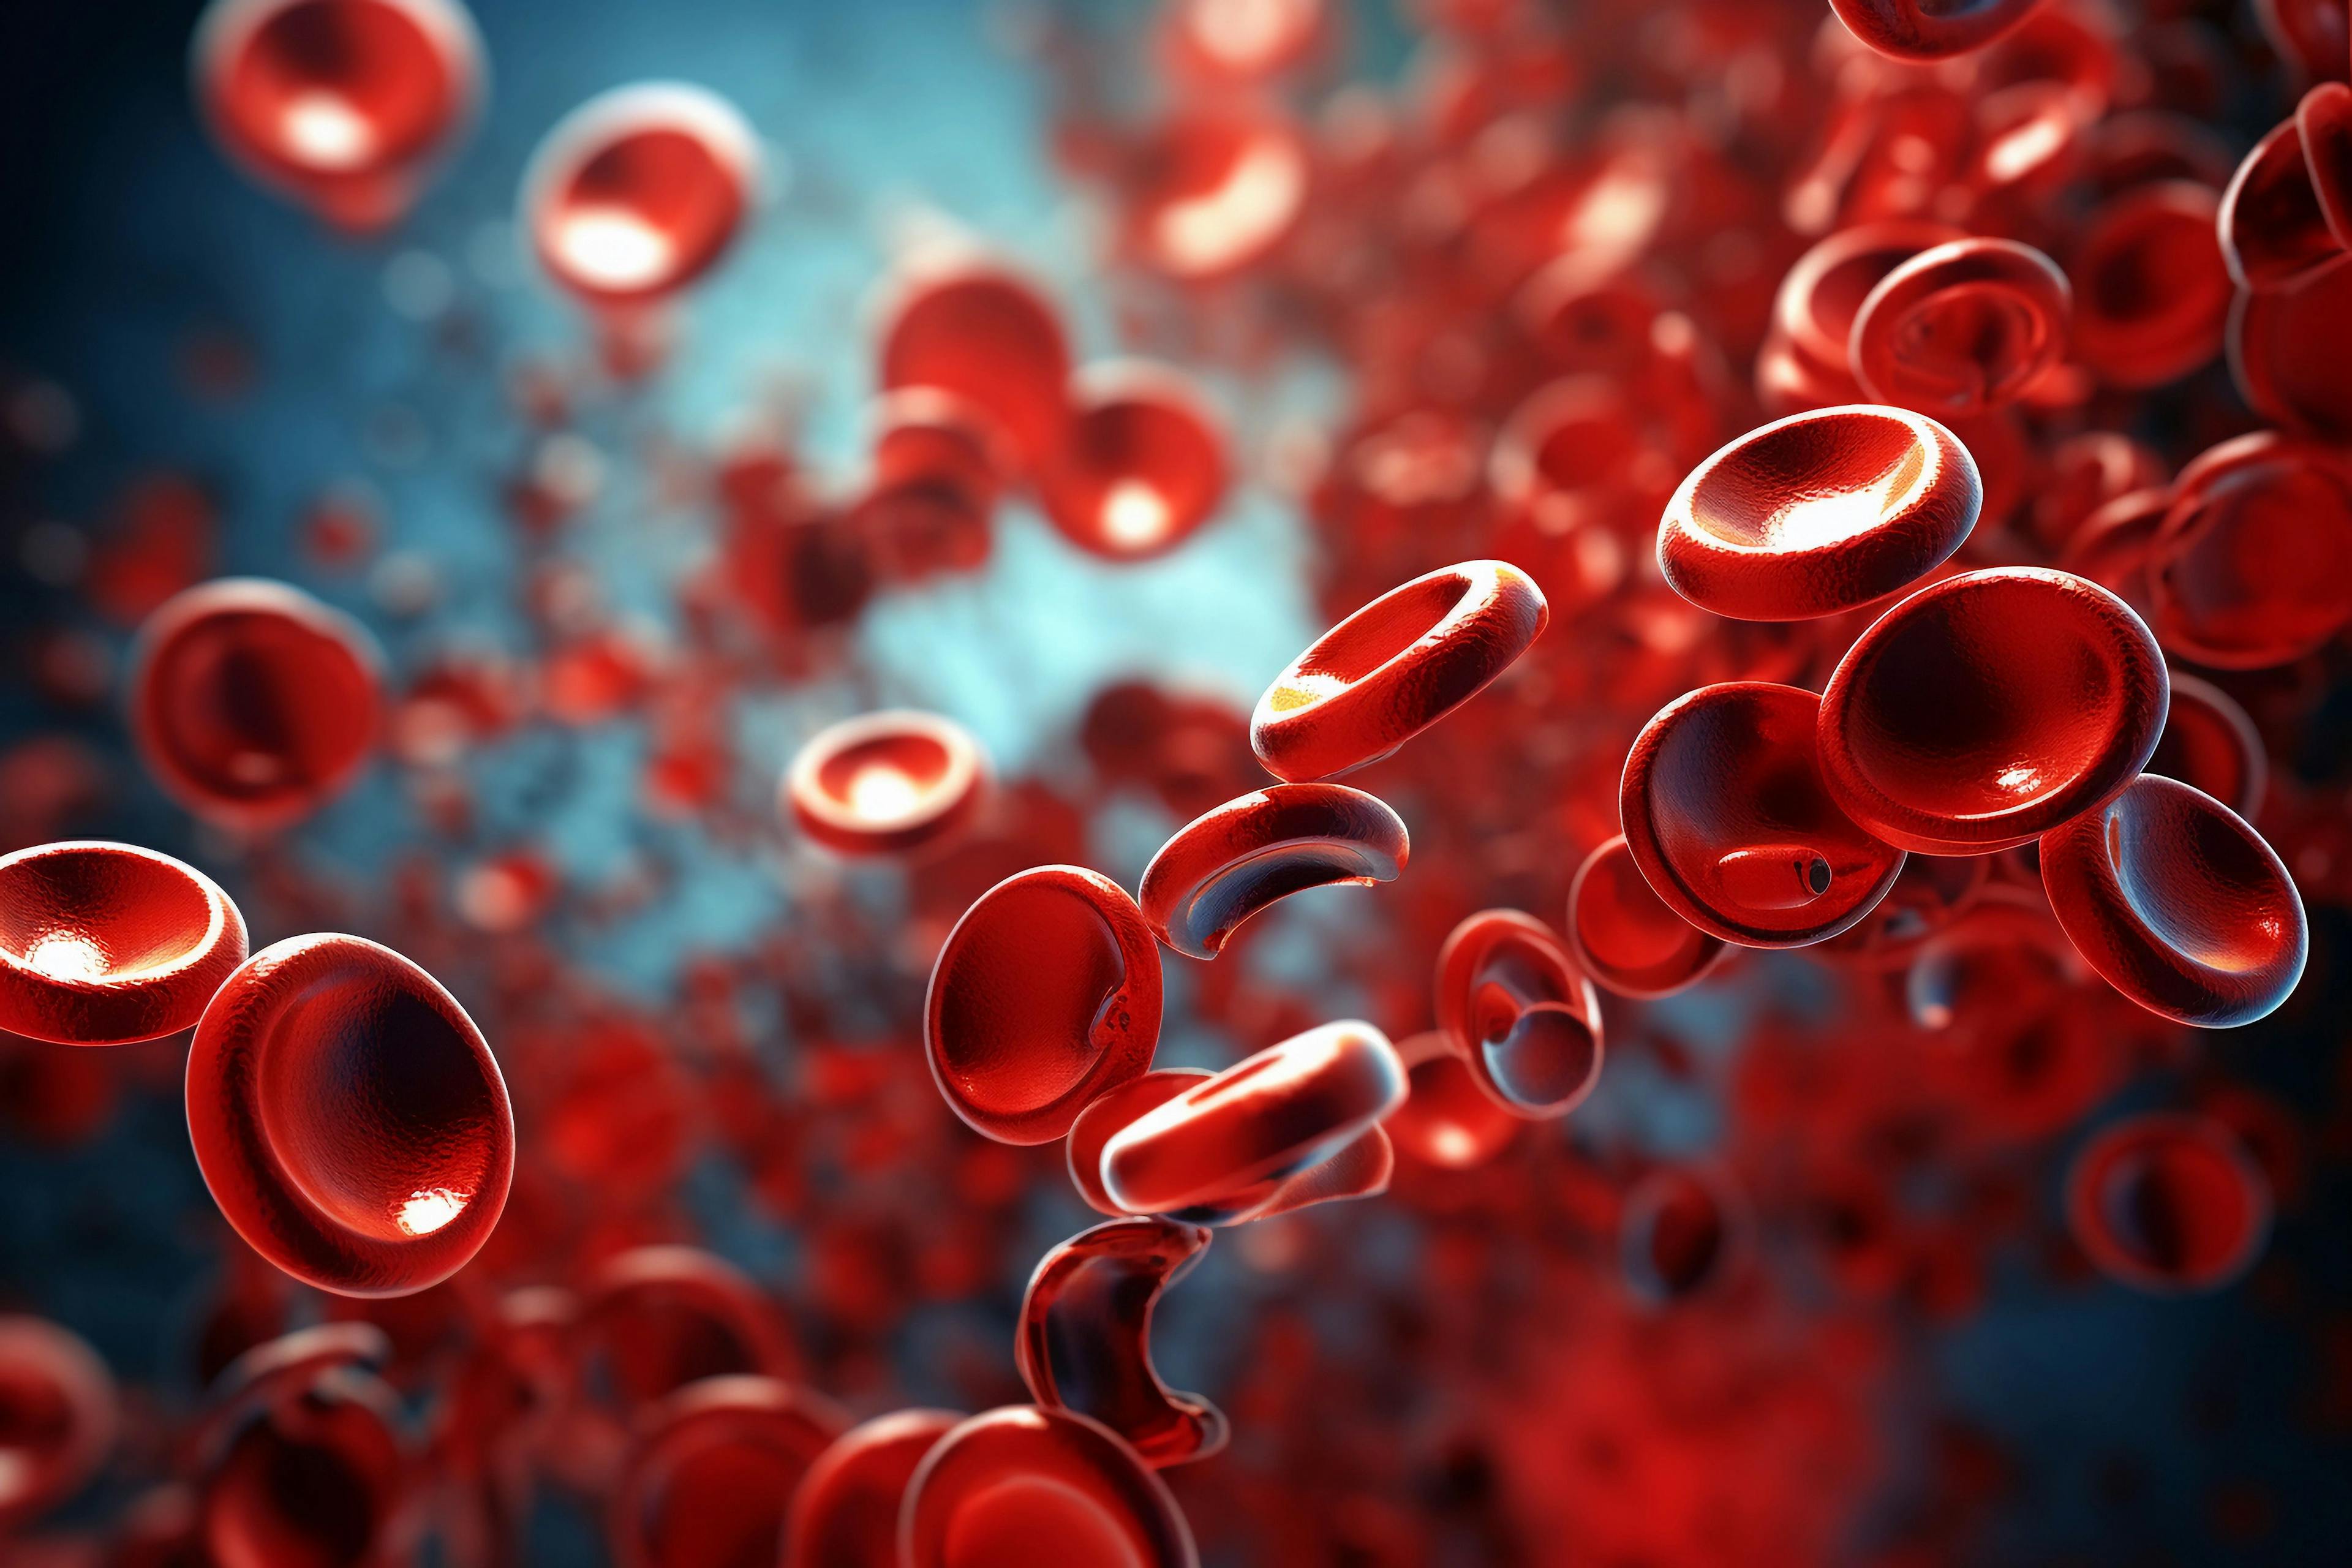 Whole Red Blood Cells | image credit: AI DREAMS - stock.adobe.com